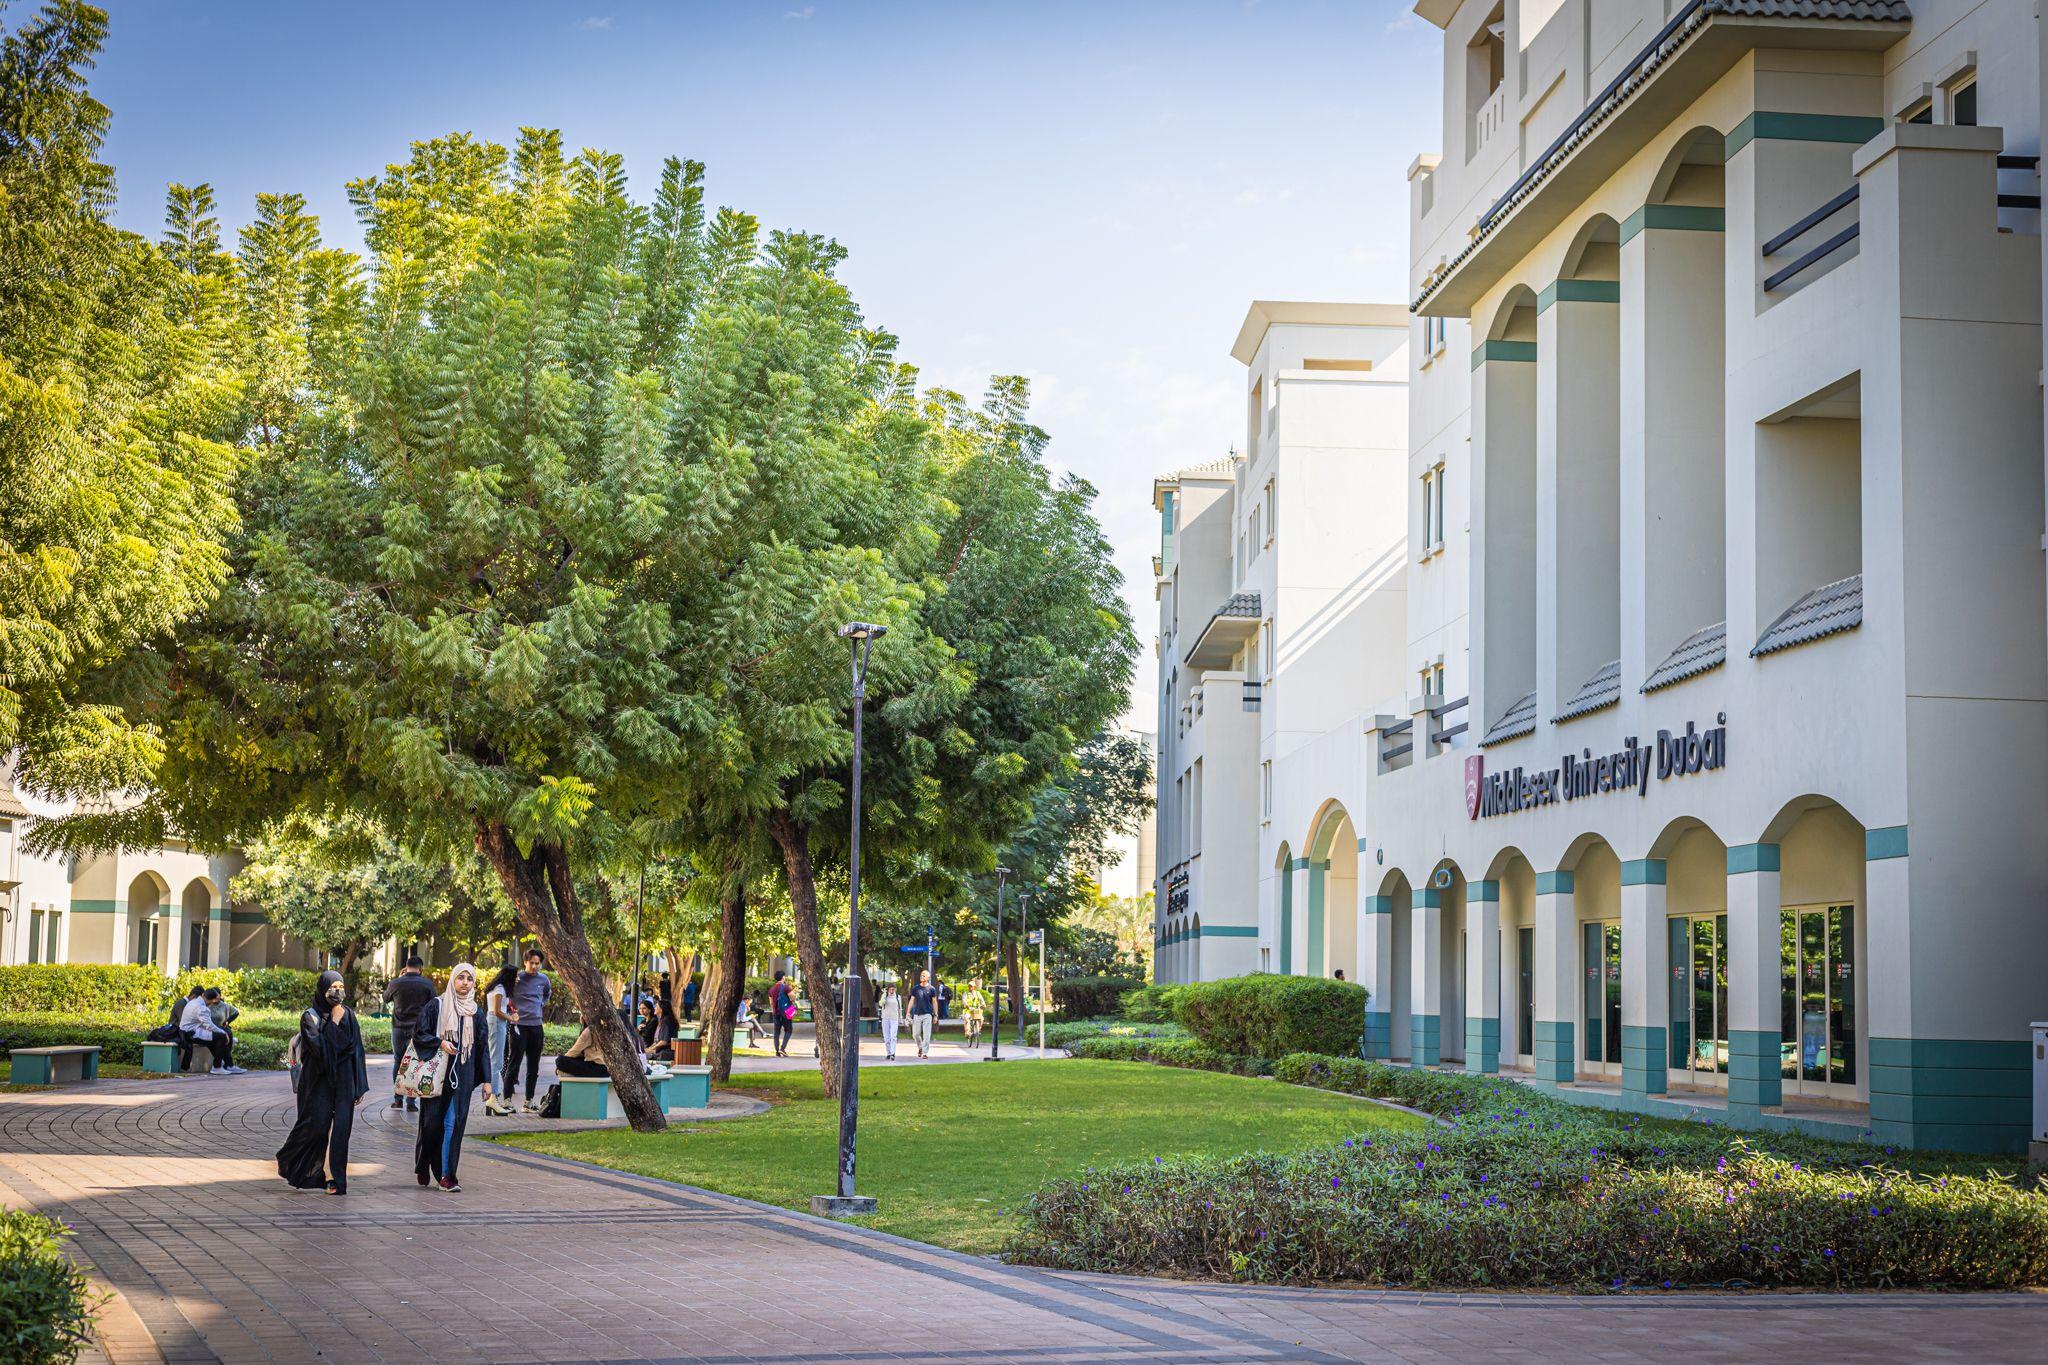 Middlesex University (MDX) Dubai is the largest British higher education institution for total student enrolment licensed by Dubai’s Knowledge and Human Development Authority (KHDA) for a third consecutive year, new KHDA Open Data for 2023 shows. 